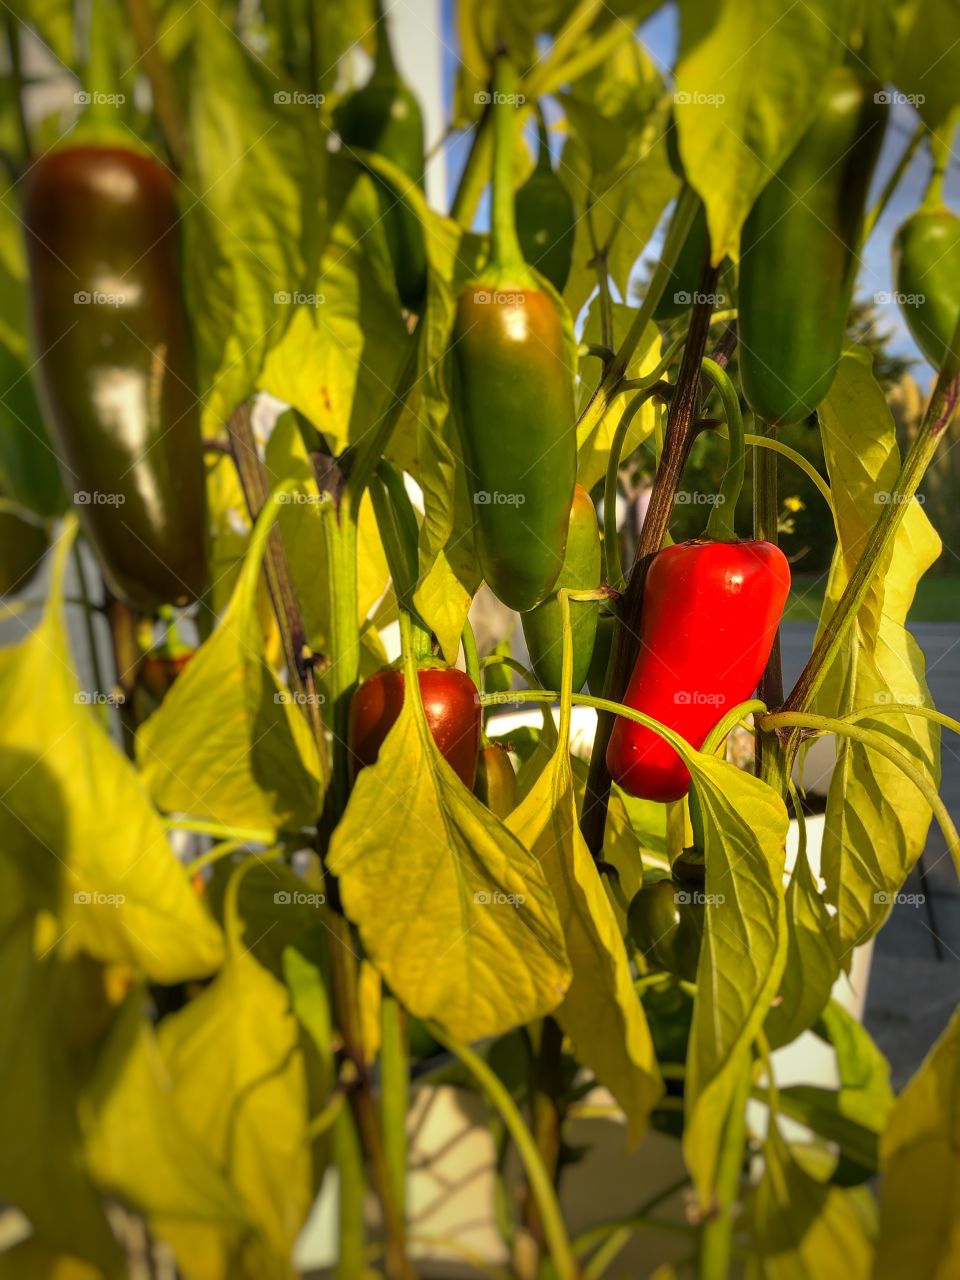 My first chillies